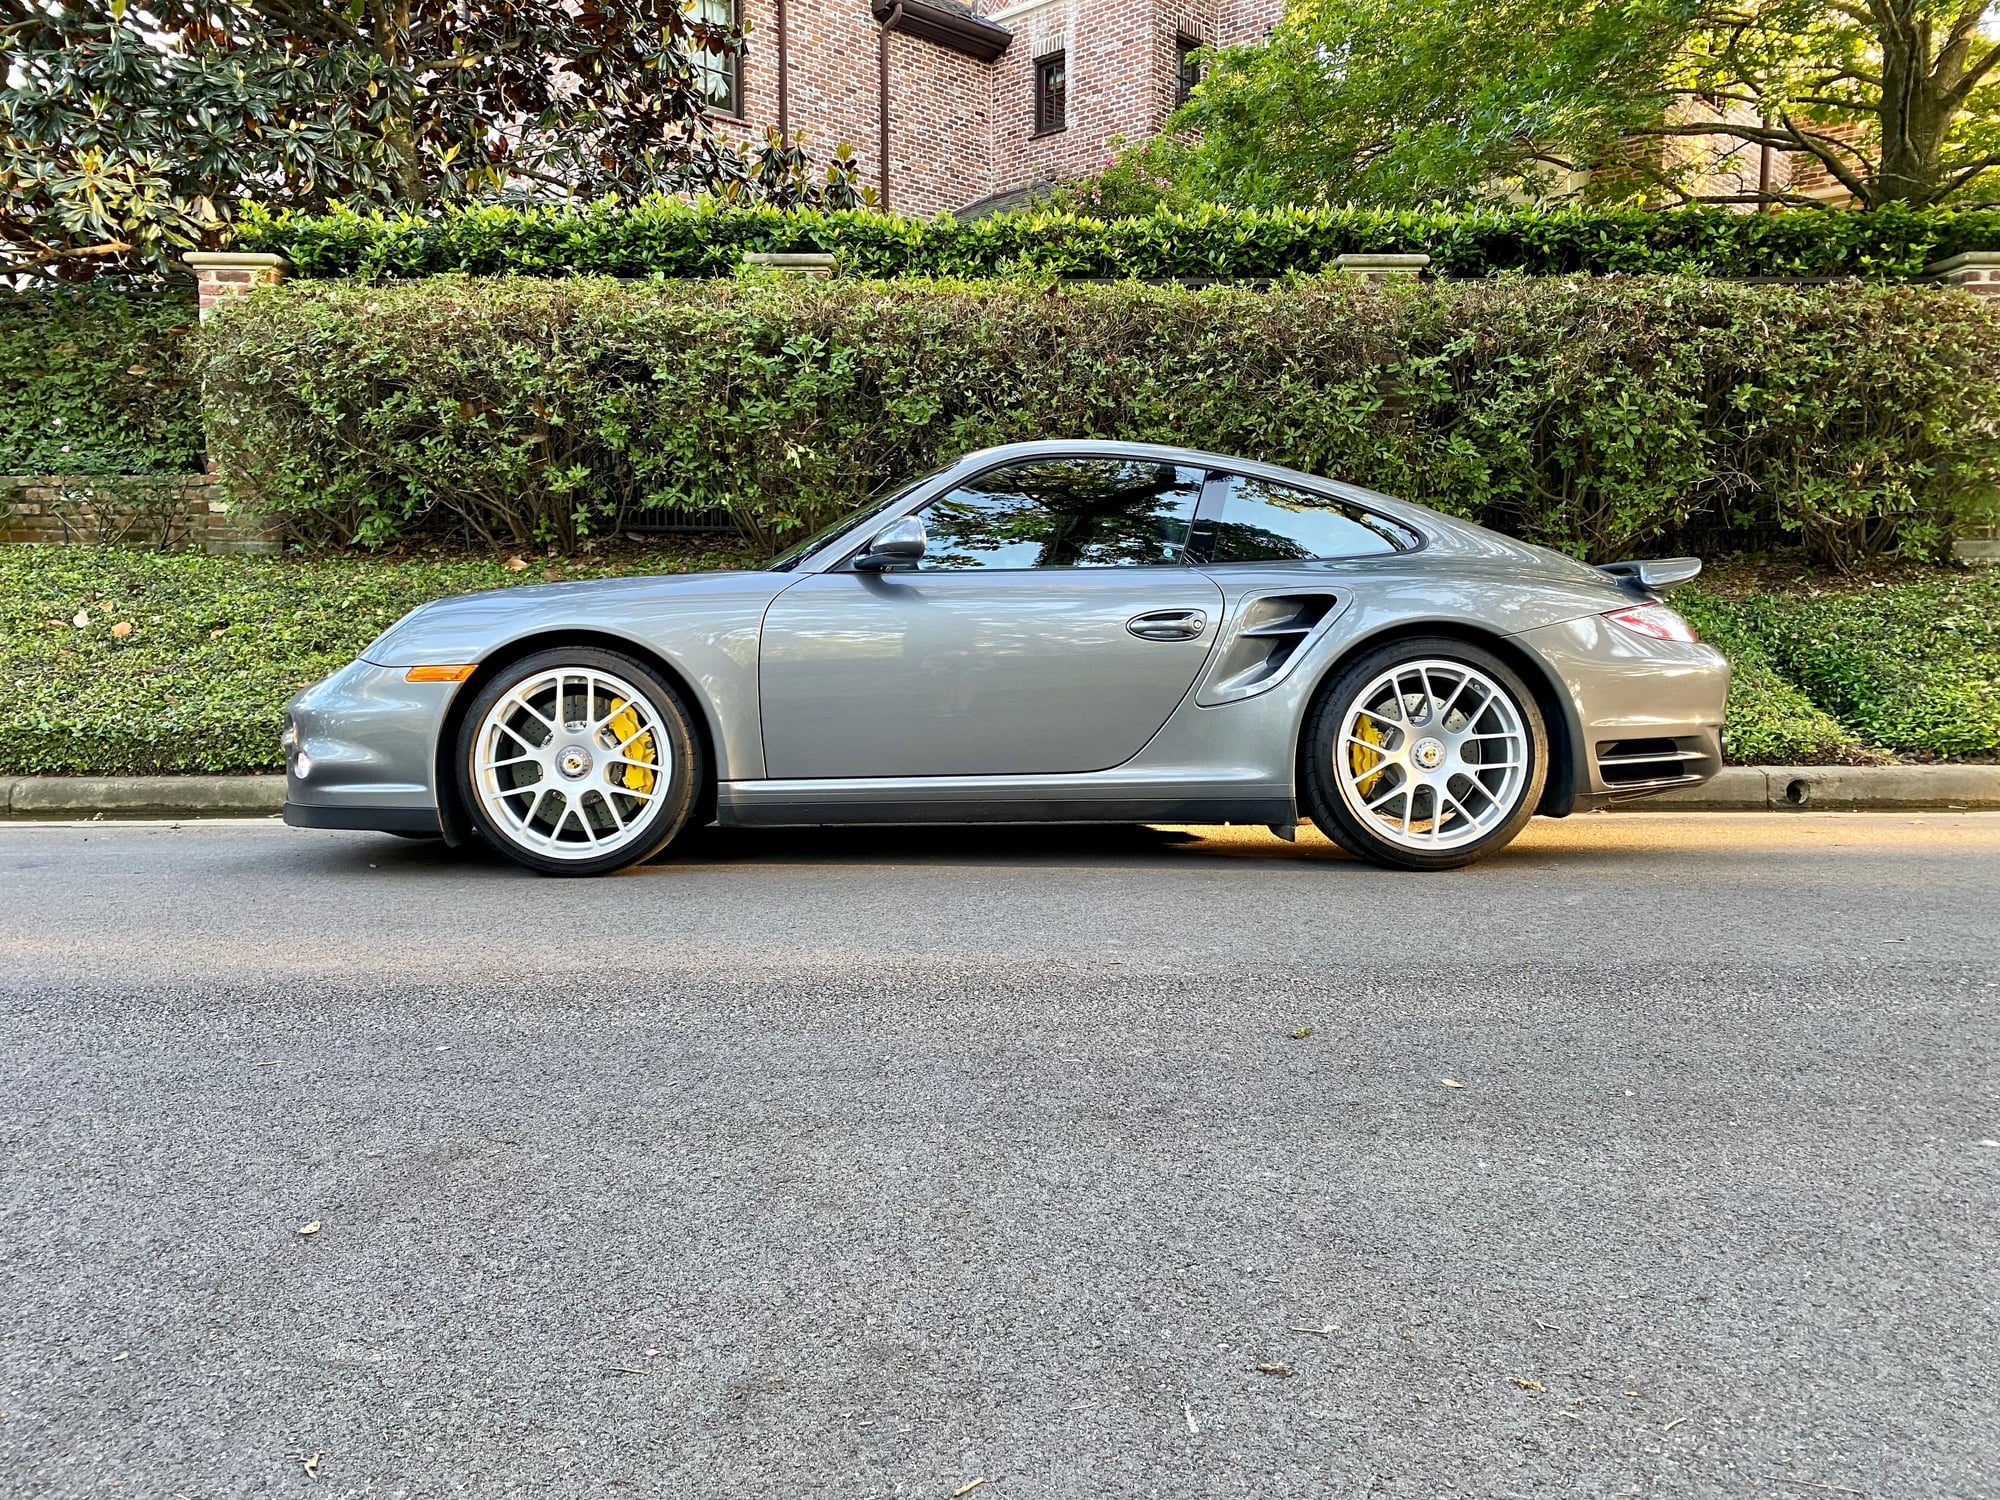 2011 Porsche 911 - CPO 2011 911 Turbo S Meteor Grey/Sea Blue Full Leather 24.5k miles - Used - VIN WP0AD2A94BS766483 - 24,500 Miles - 6 cyl - AWD - Automatic - Coupe - Gray - Houston, TX 77008, United States